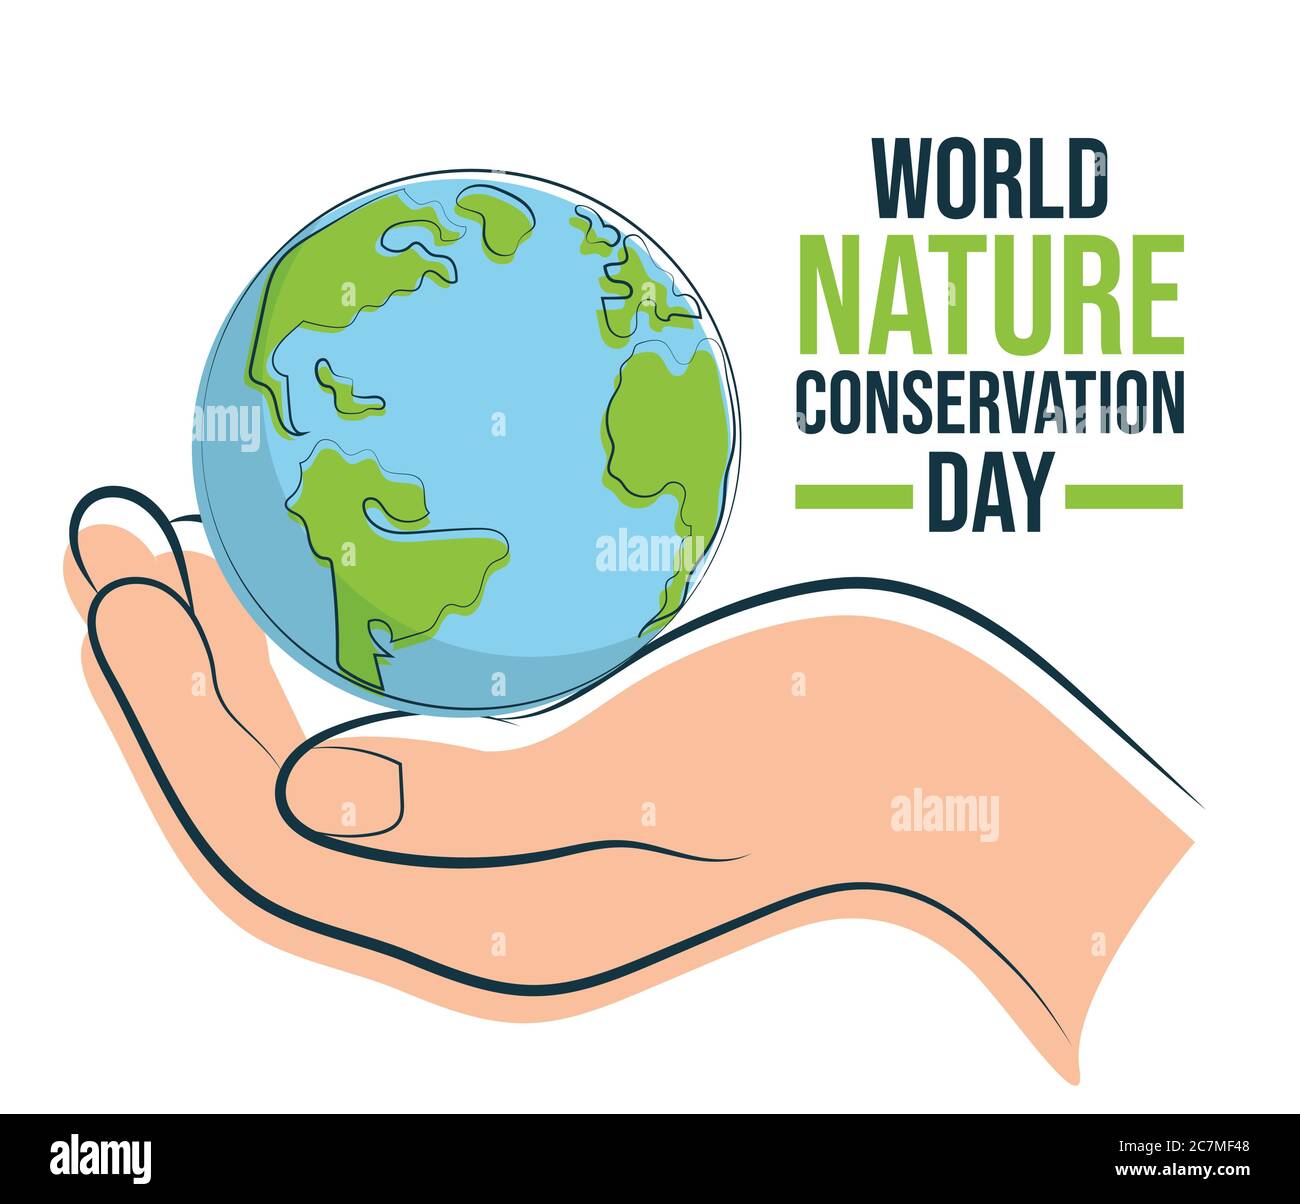 World Nature Conservation Day, Earth on hand symbol of care and ...